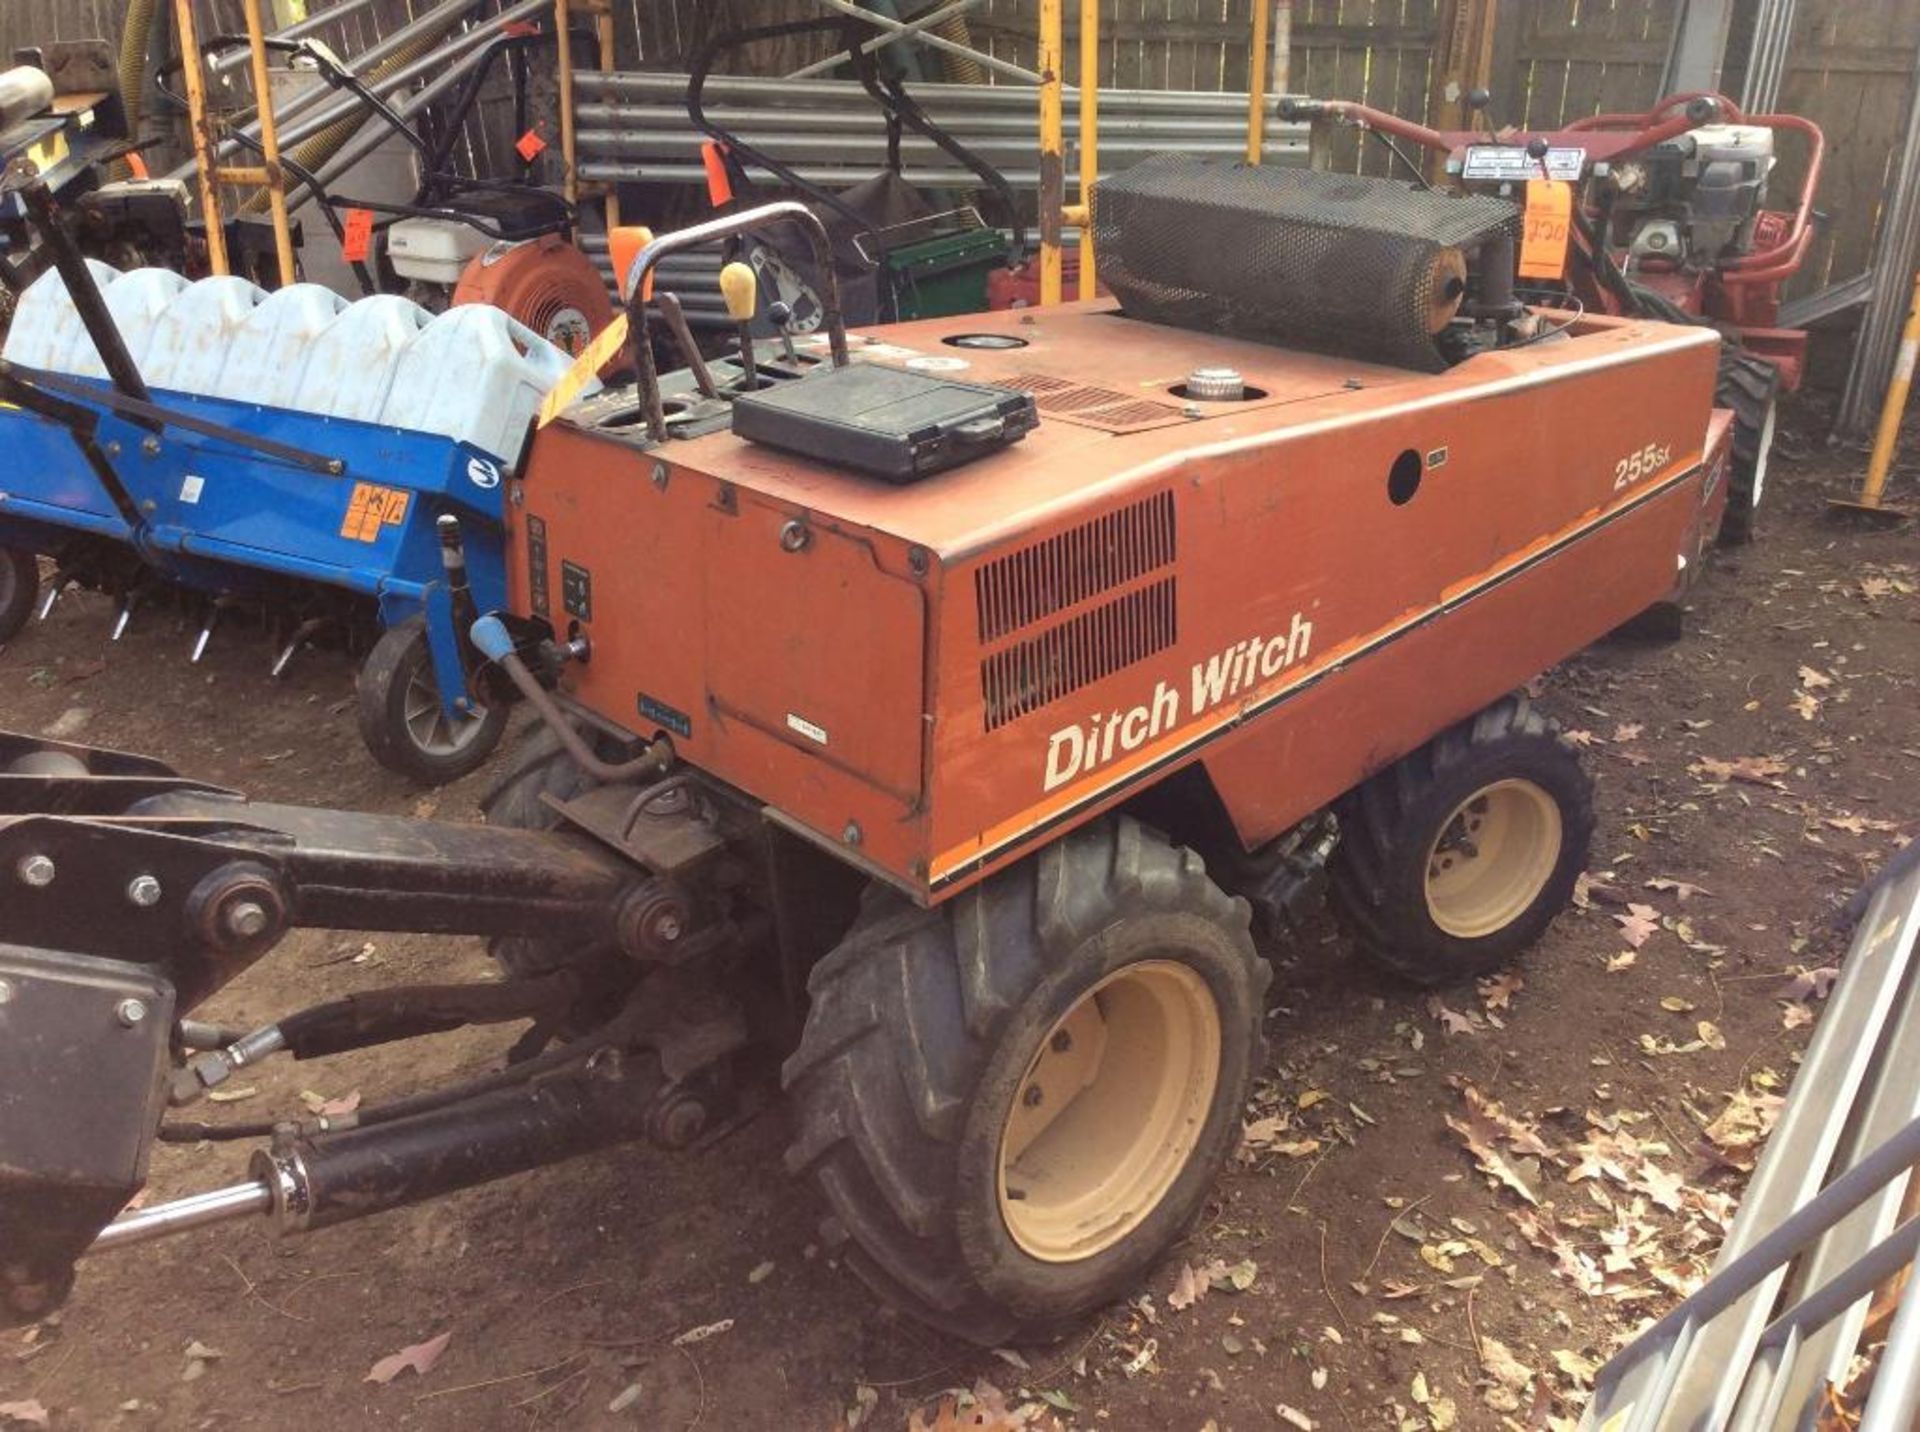 Ditch Witch m/n 255sx ditch/trench digger, 2-cylinder engine, reading 215 hours - Image 2 of 2